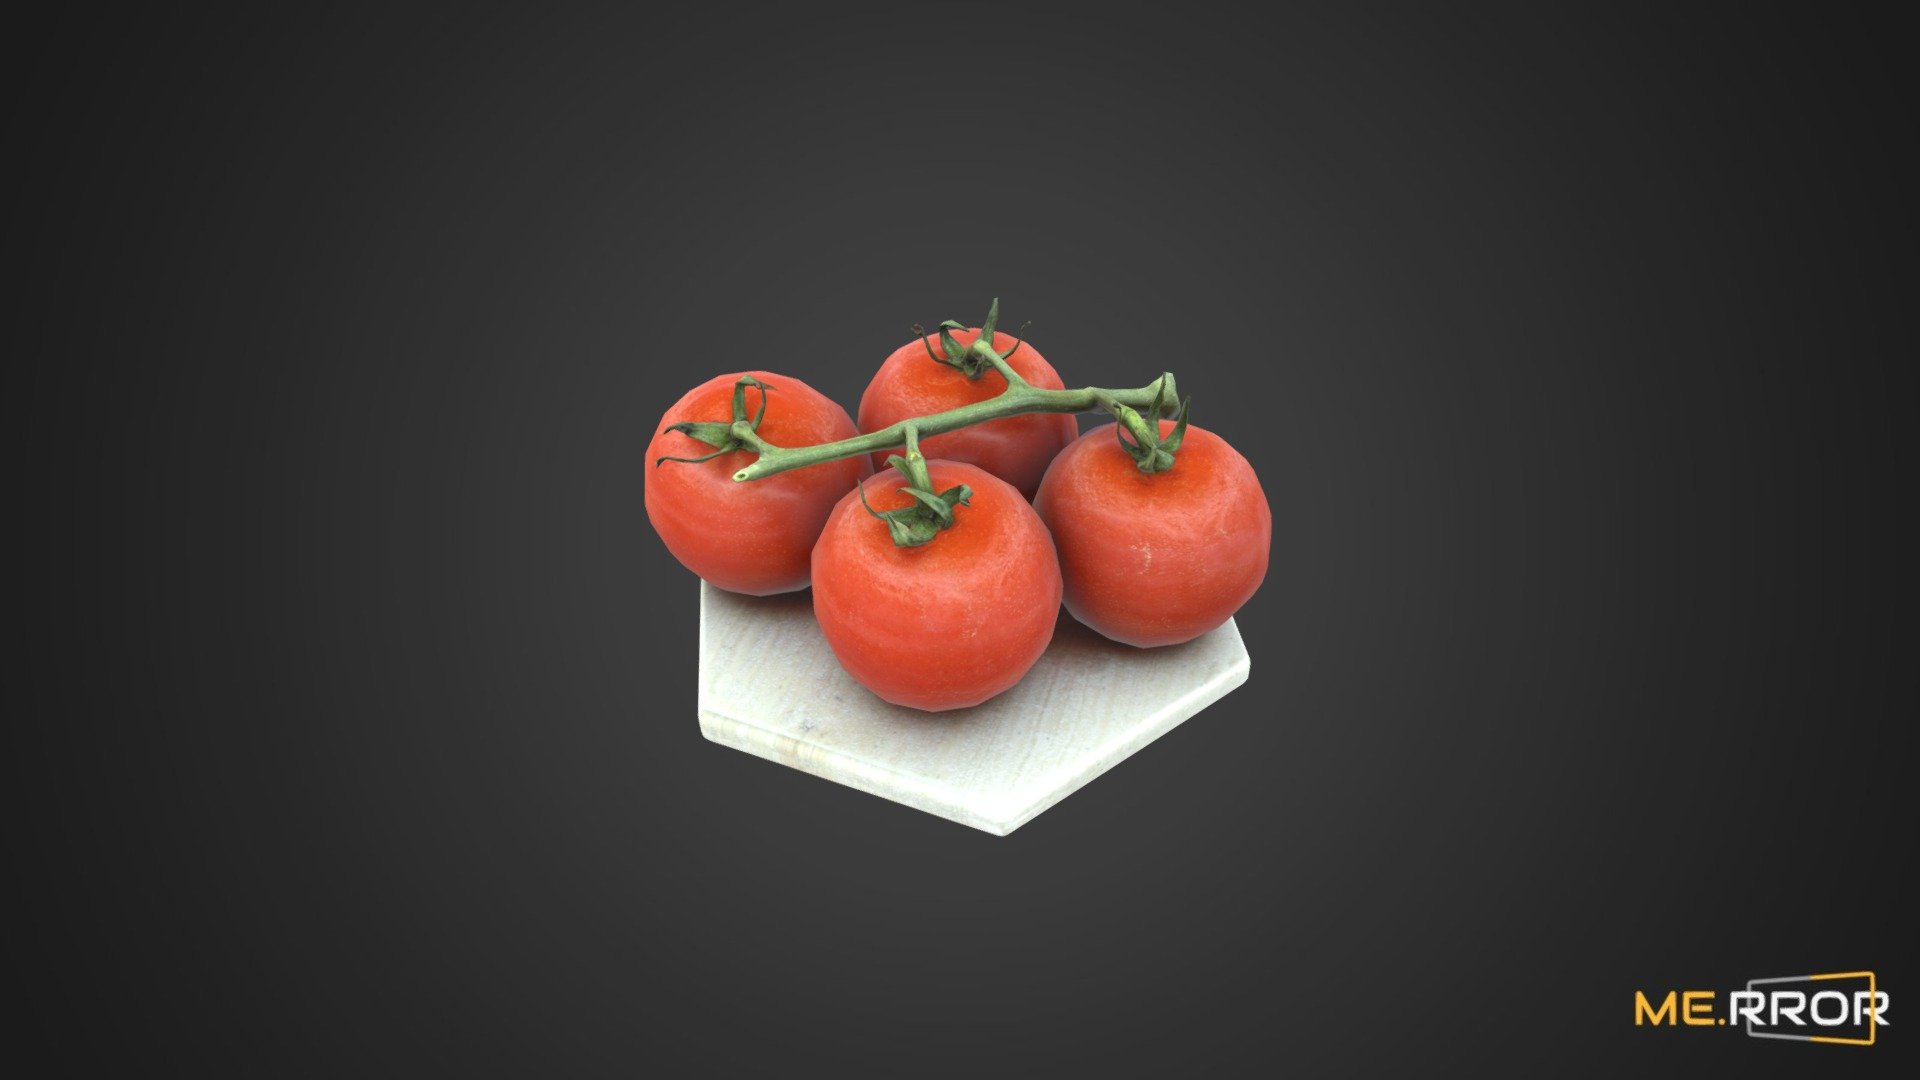 MERROR is a 3D Content PLATFORM which introduces various Asian assets to the 3D world


3DScanning #Photogrametry #ME.RROR - [Game-Ready] Cherry tomatoes - Buy Royalty Free 3D model by ME.RROR Studio (@merror) 3d model